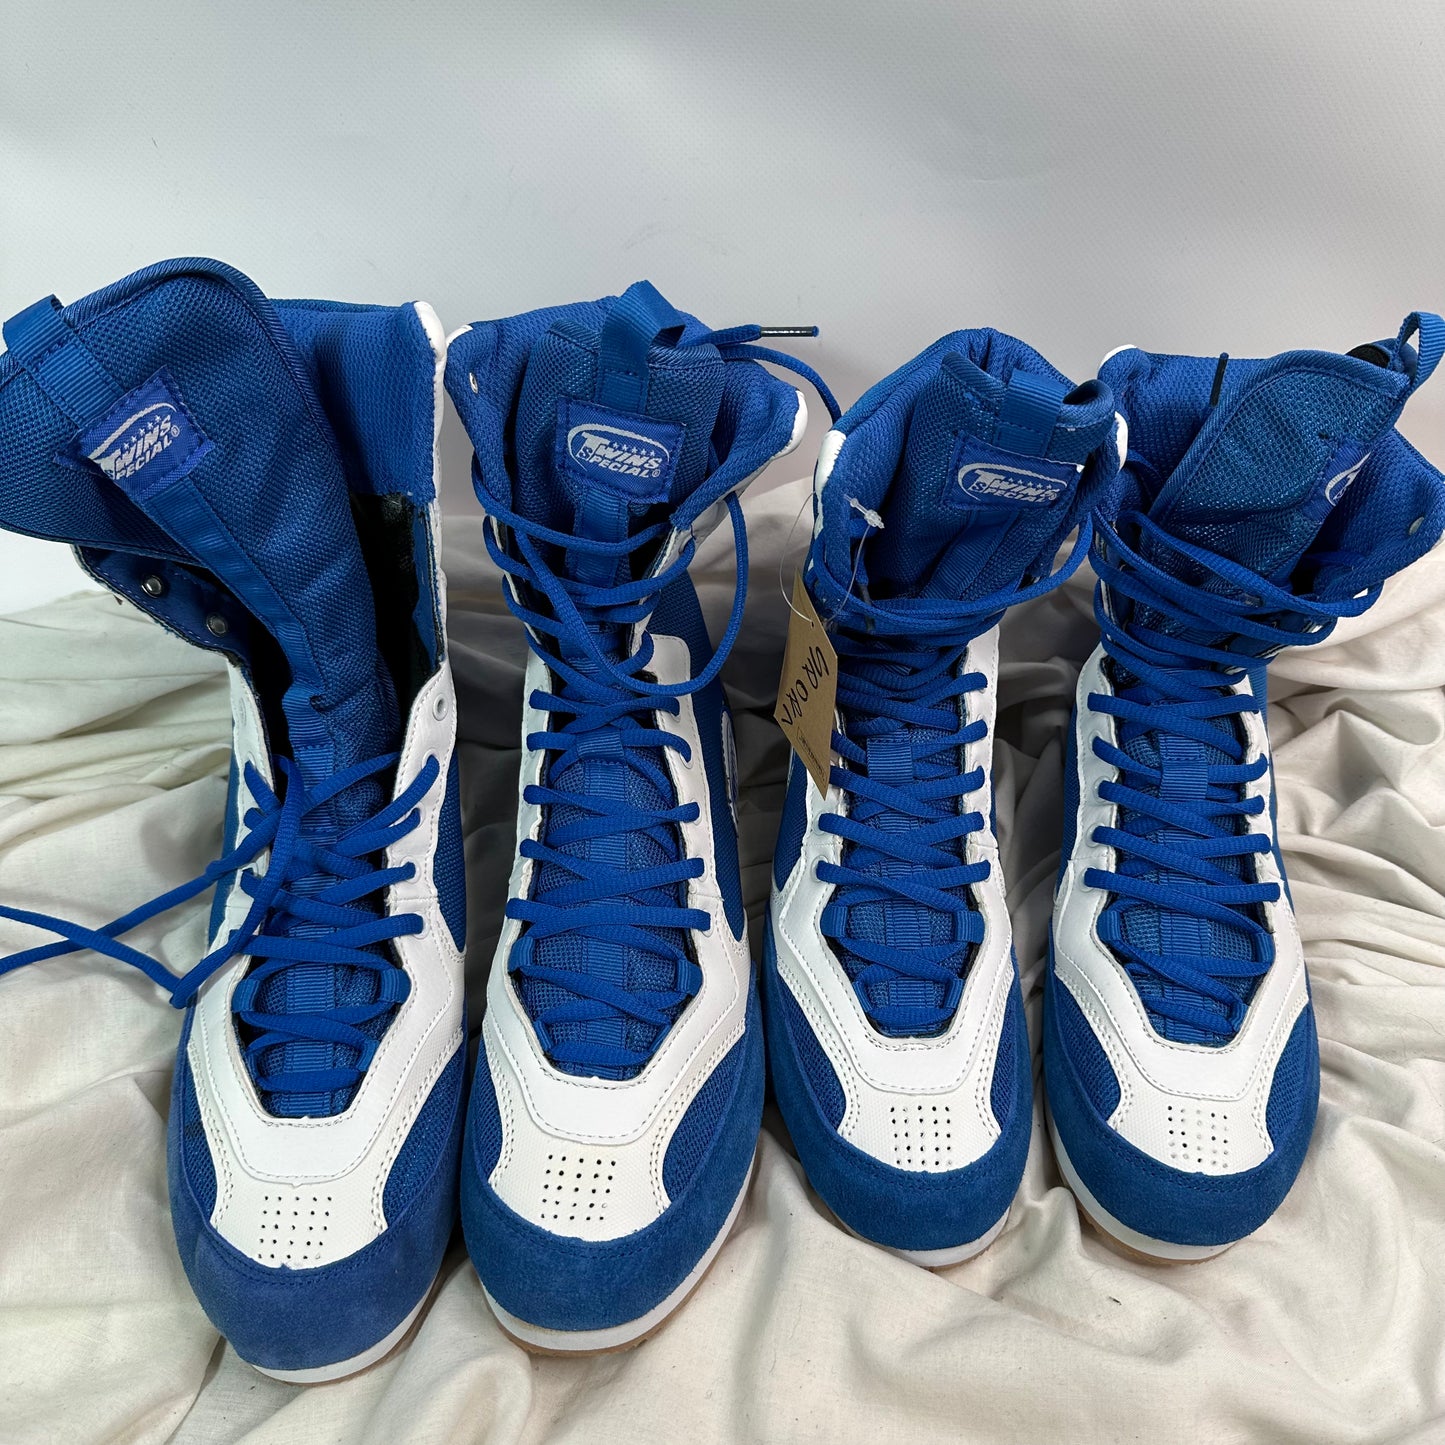 Vintage Deadstock Boxing Boots 40/41